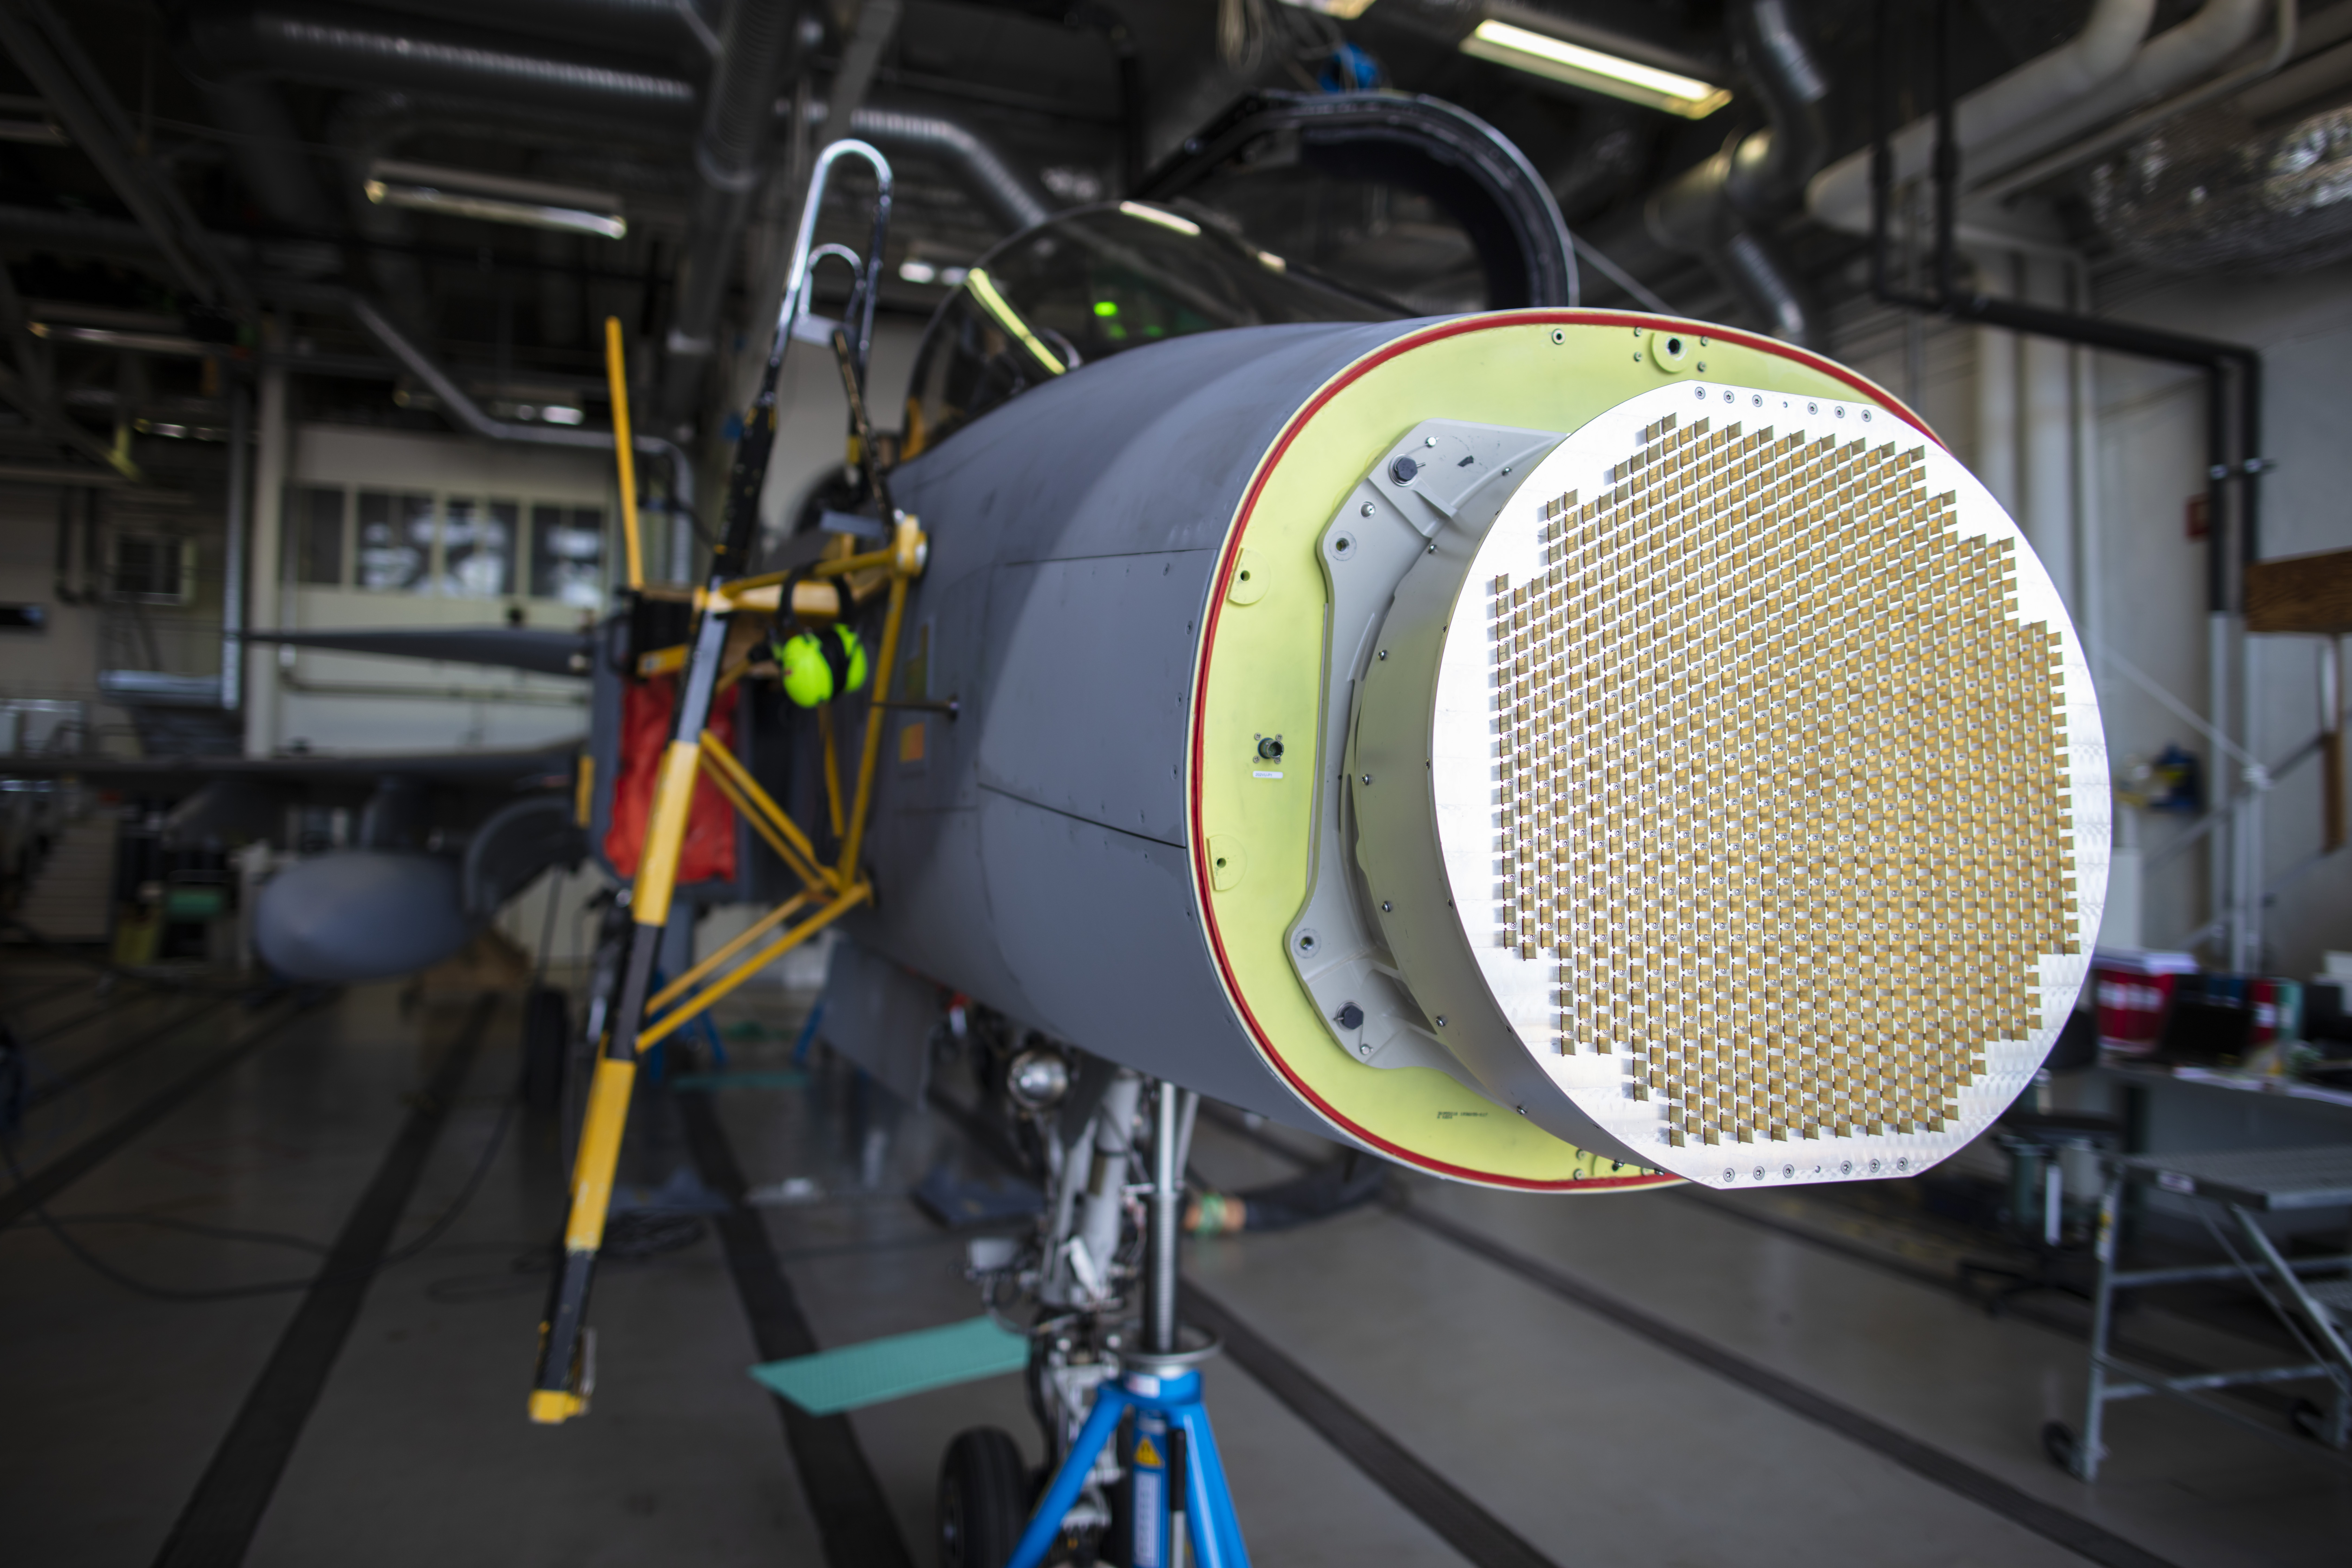 The AESA radar can be offered as an upgrade for existing Gripens, and is distinct from the Leonardo radar fitted to Gripen E. 